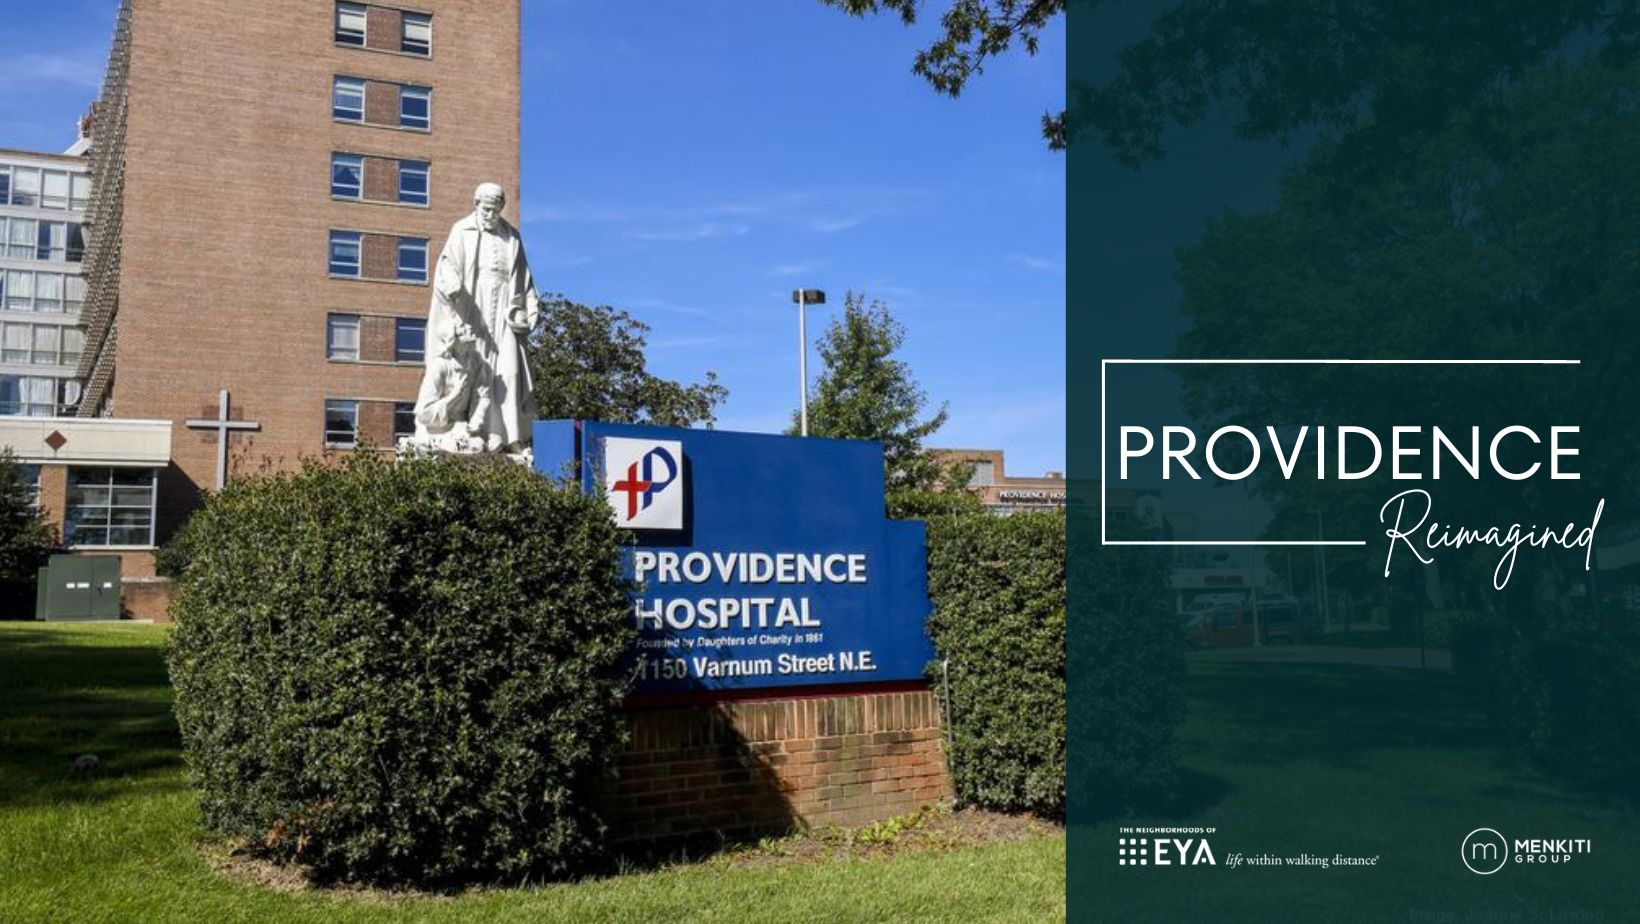 Providence Reimagined selected to develop former Providence Hospital site into mixed-income neighborhood